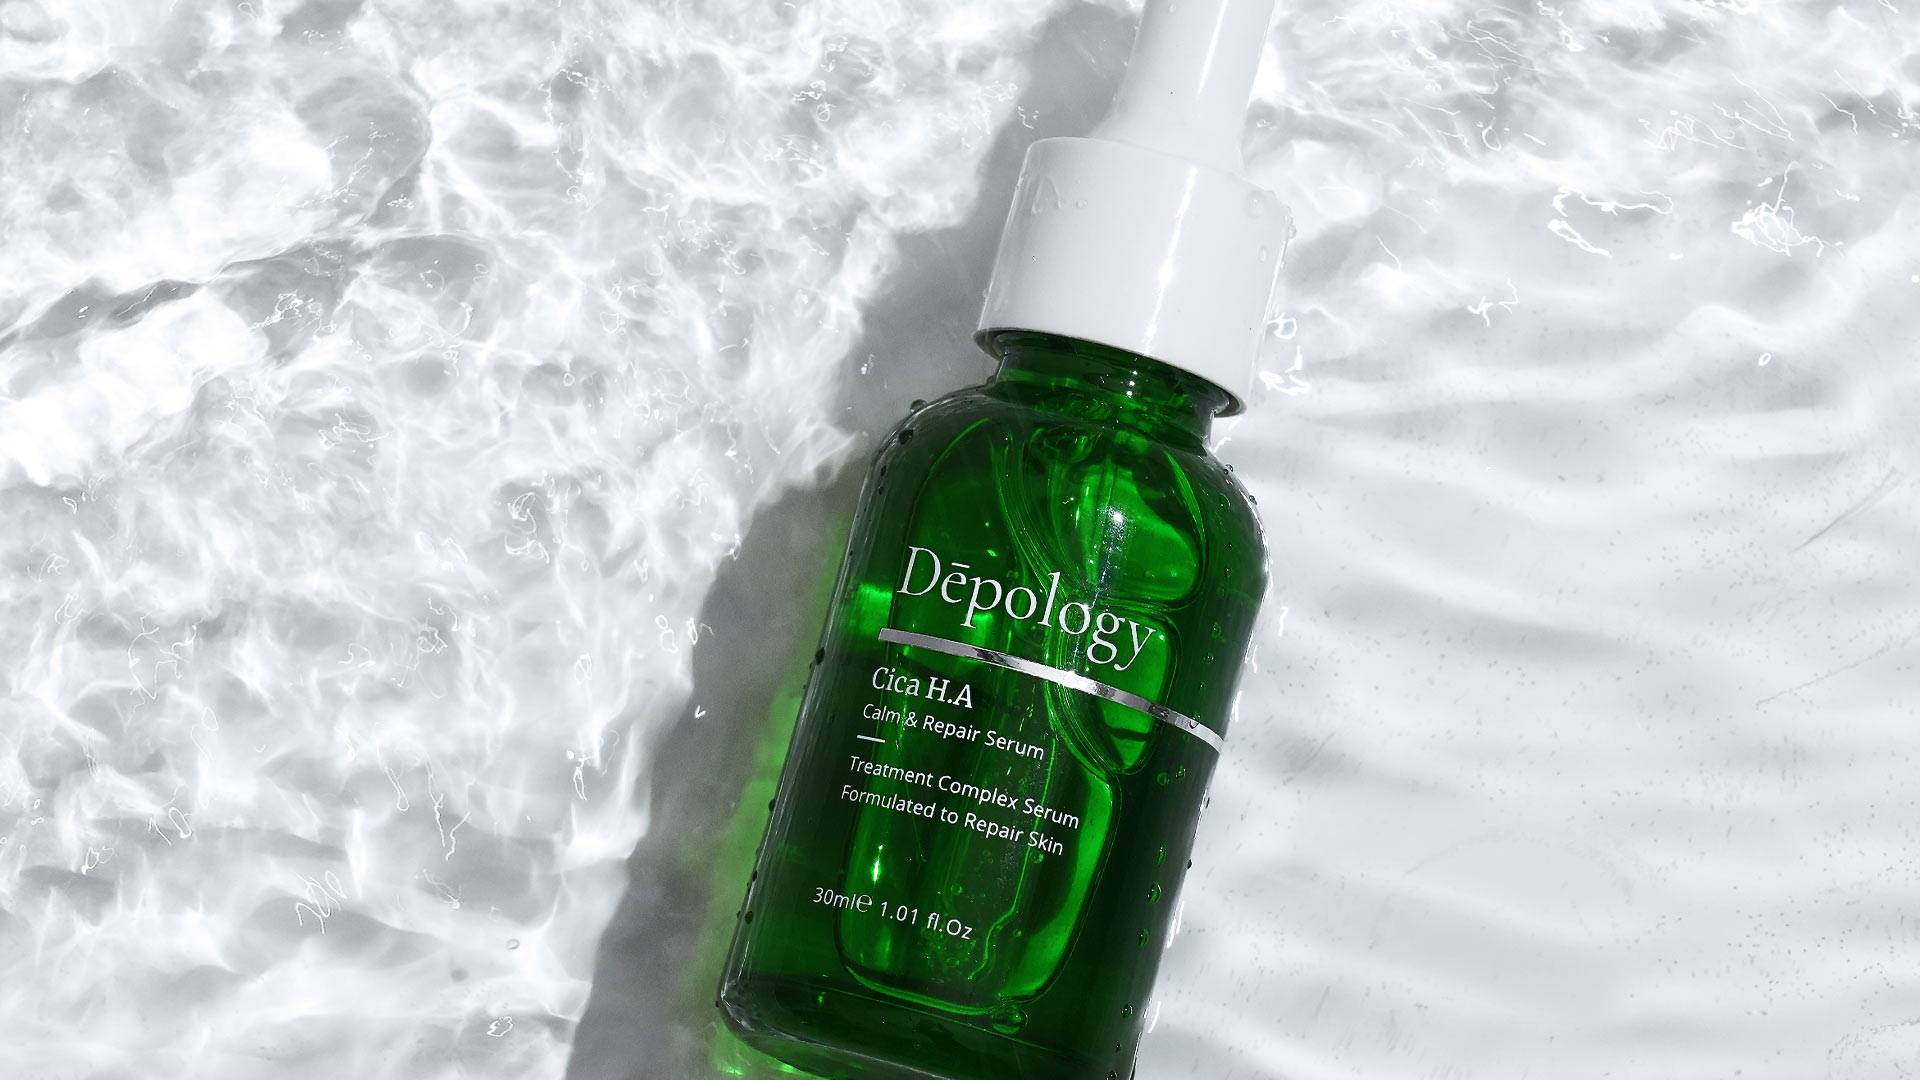 ​A healing treatment serum that has been formulated to calm, repair and soothe sensitive skin. This serum contains an advanced complex of repairing ingredients, helping to repair and protect sensitive skin.